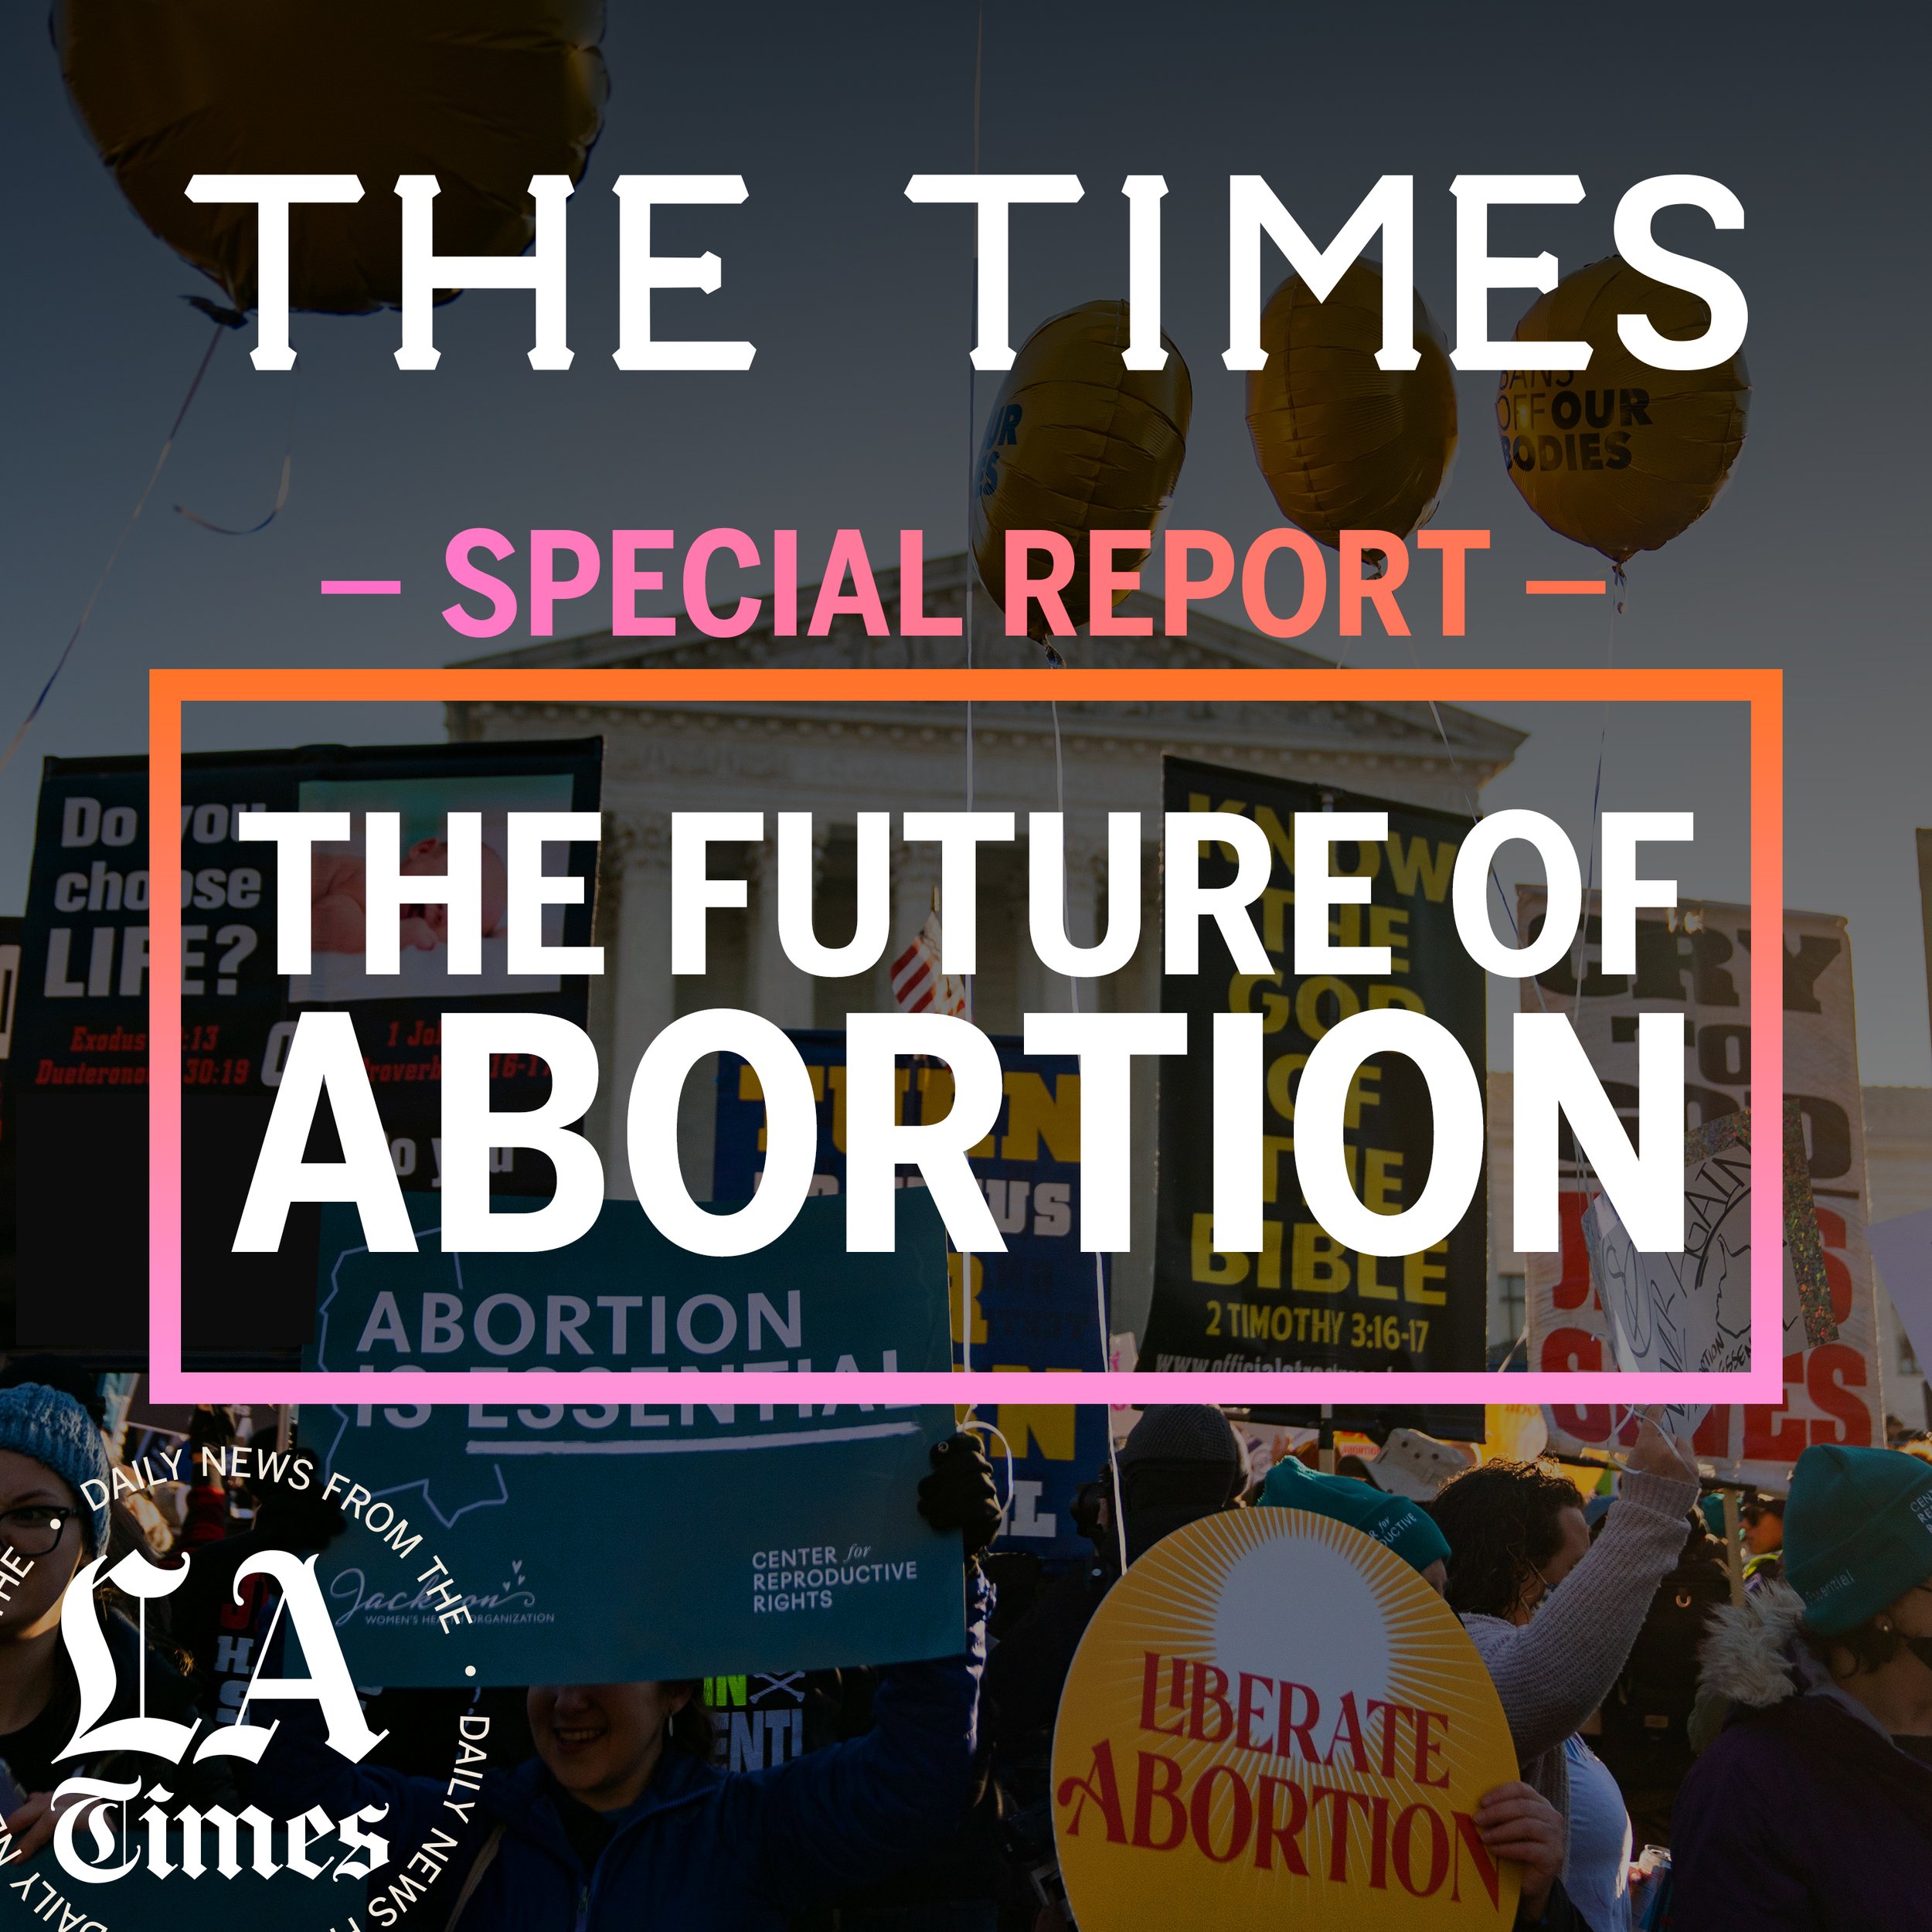 The Future of Abortion: Keeping it